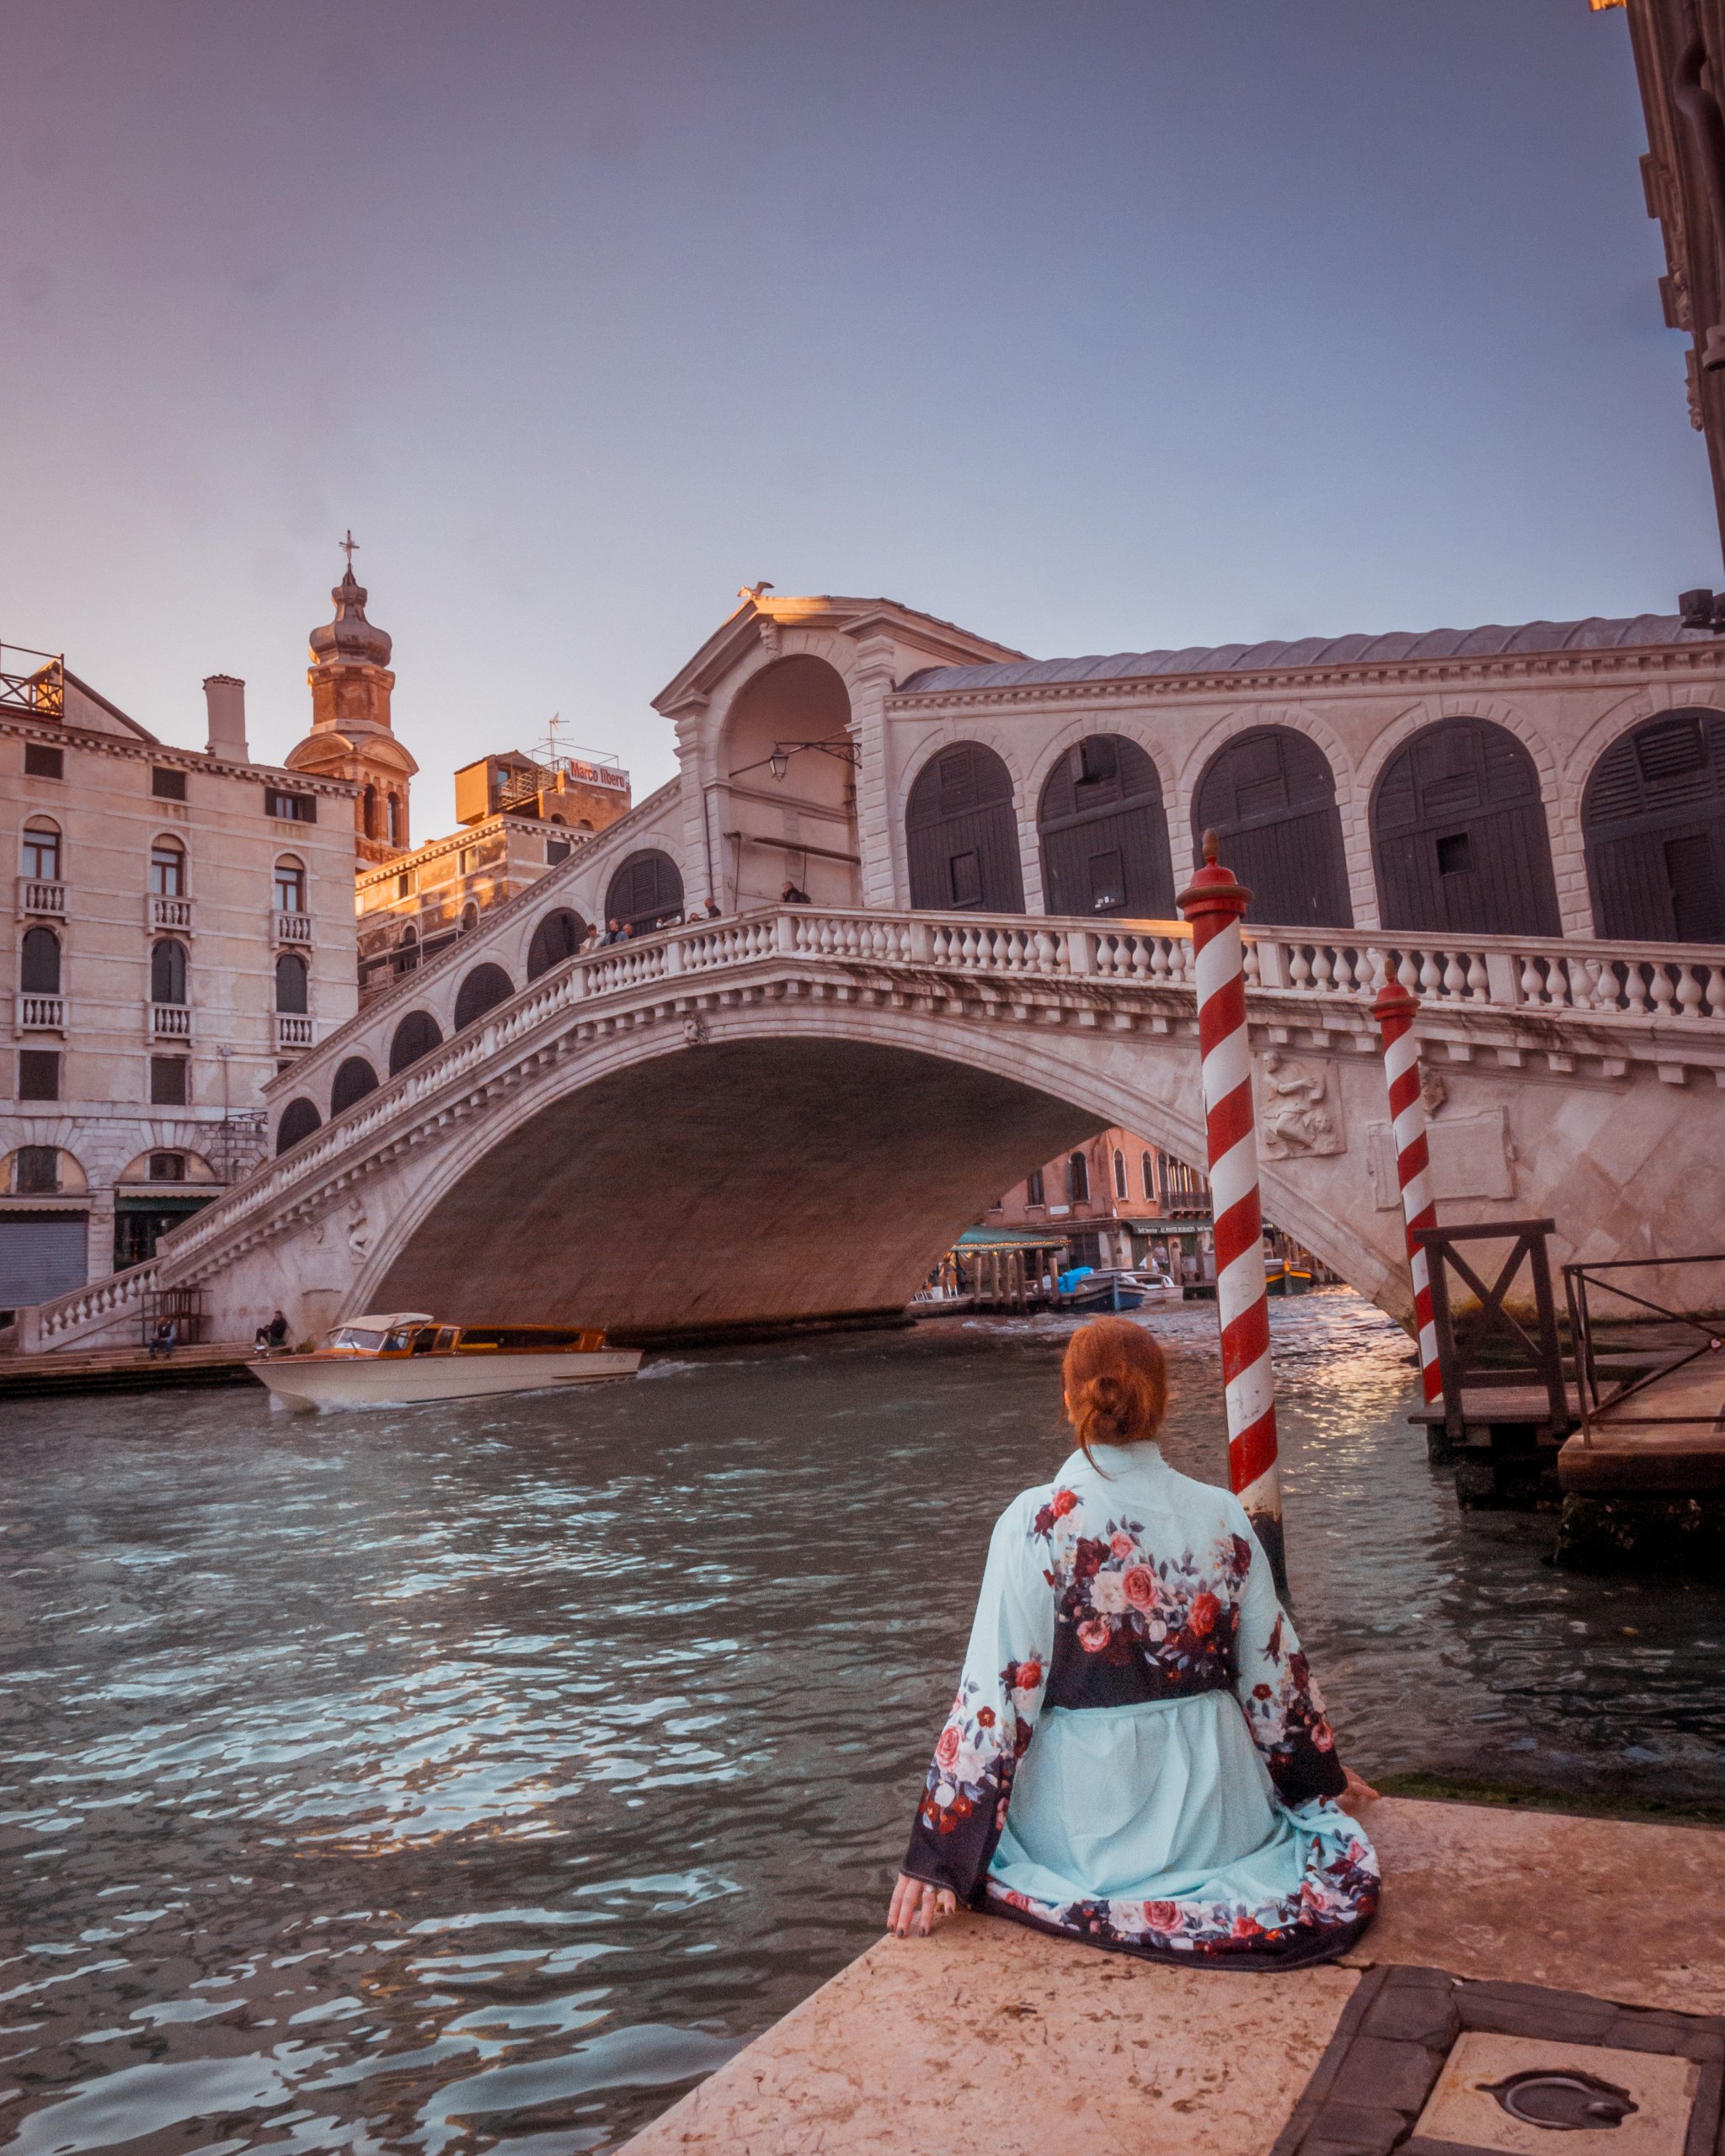 Woman sitting on a dock on the Grand Canal in Venice looking at the Rialto Bridge